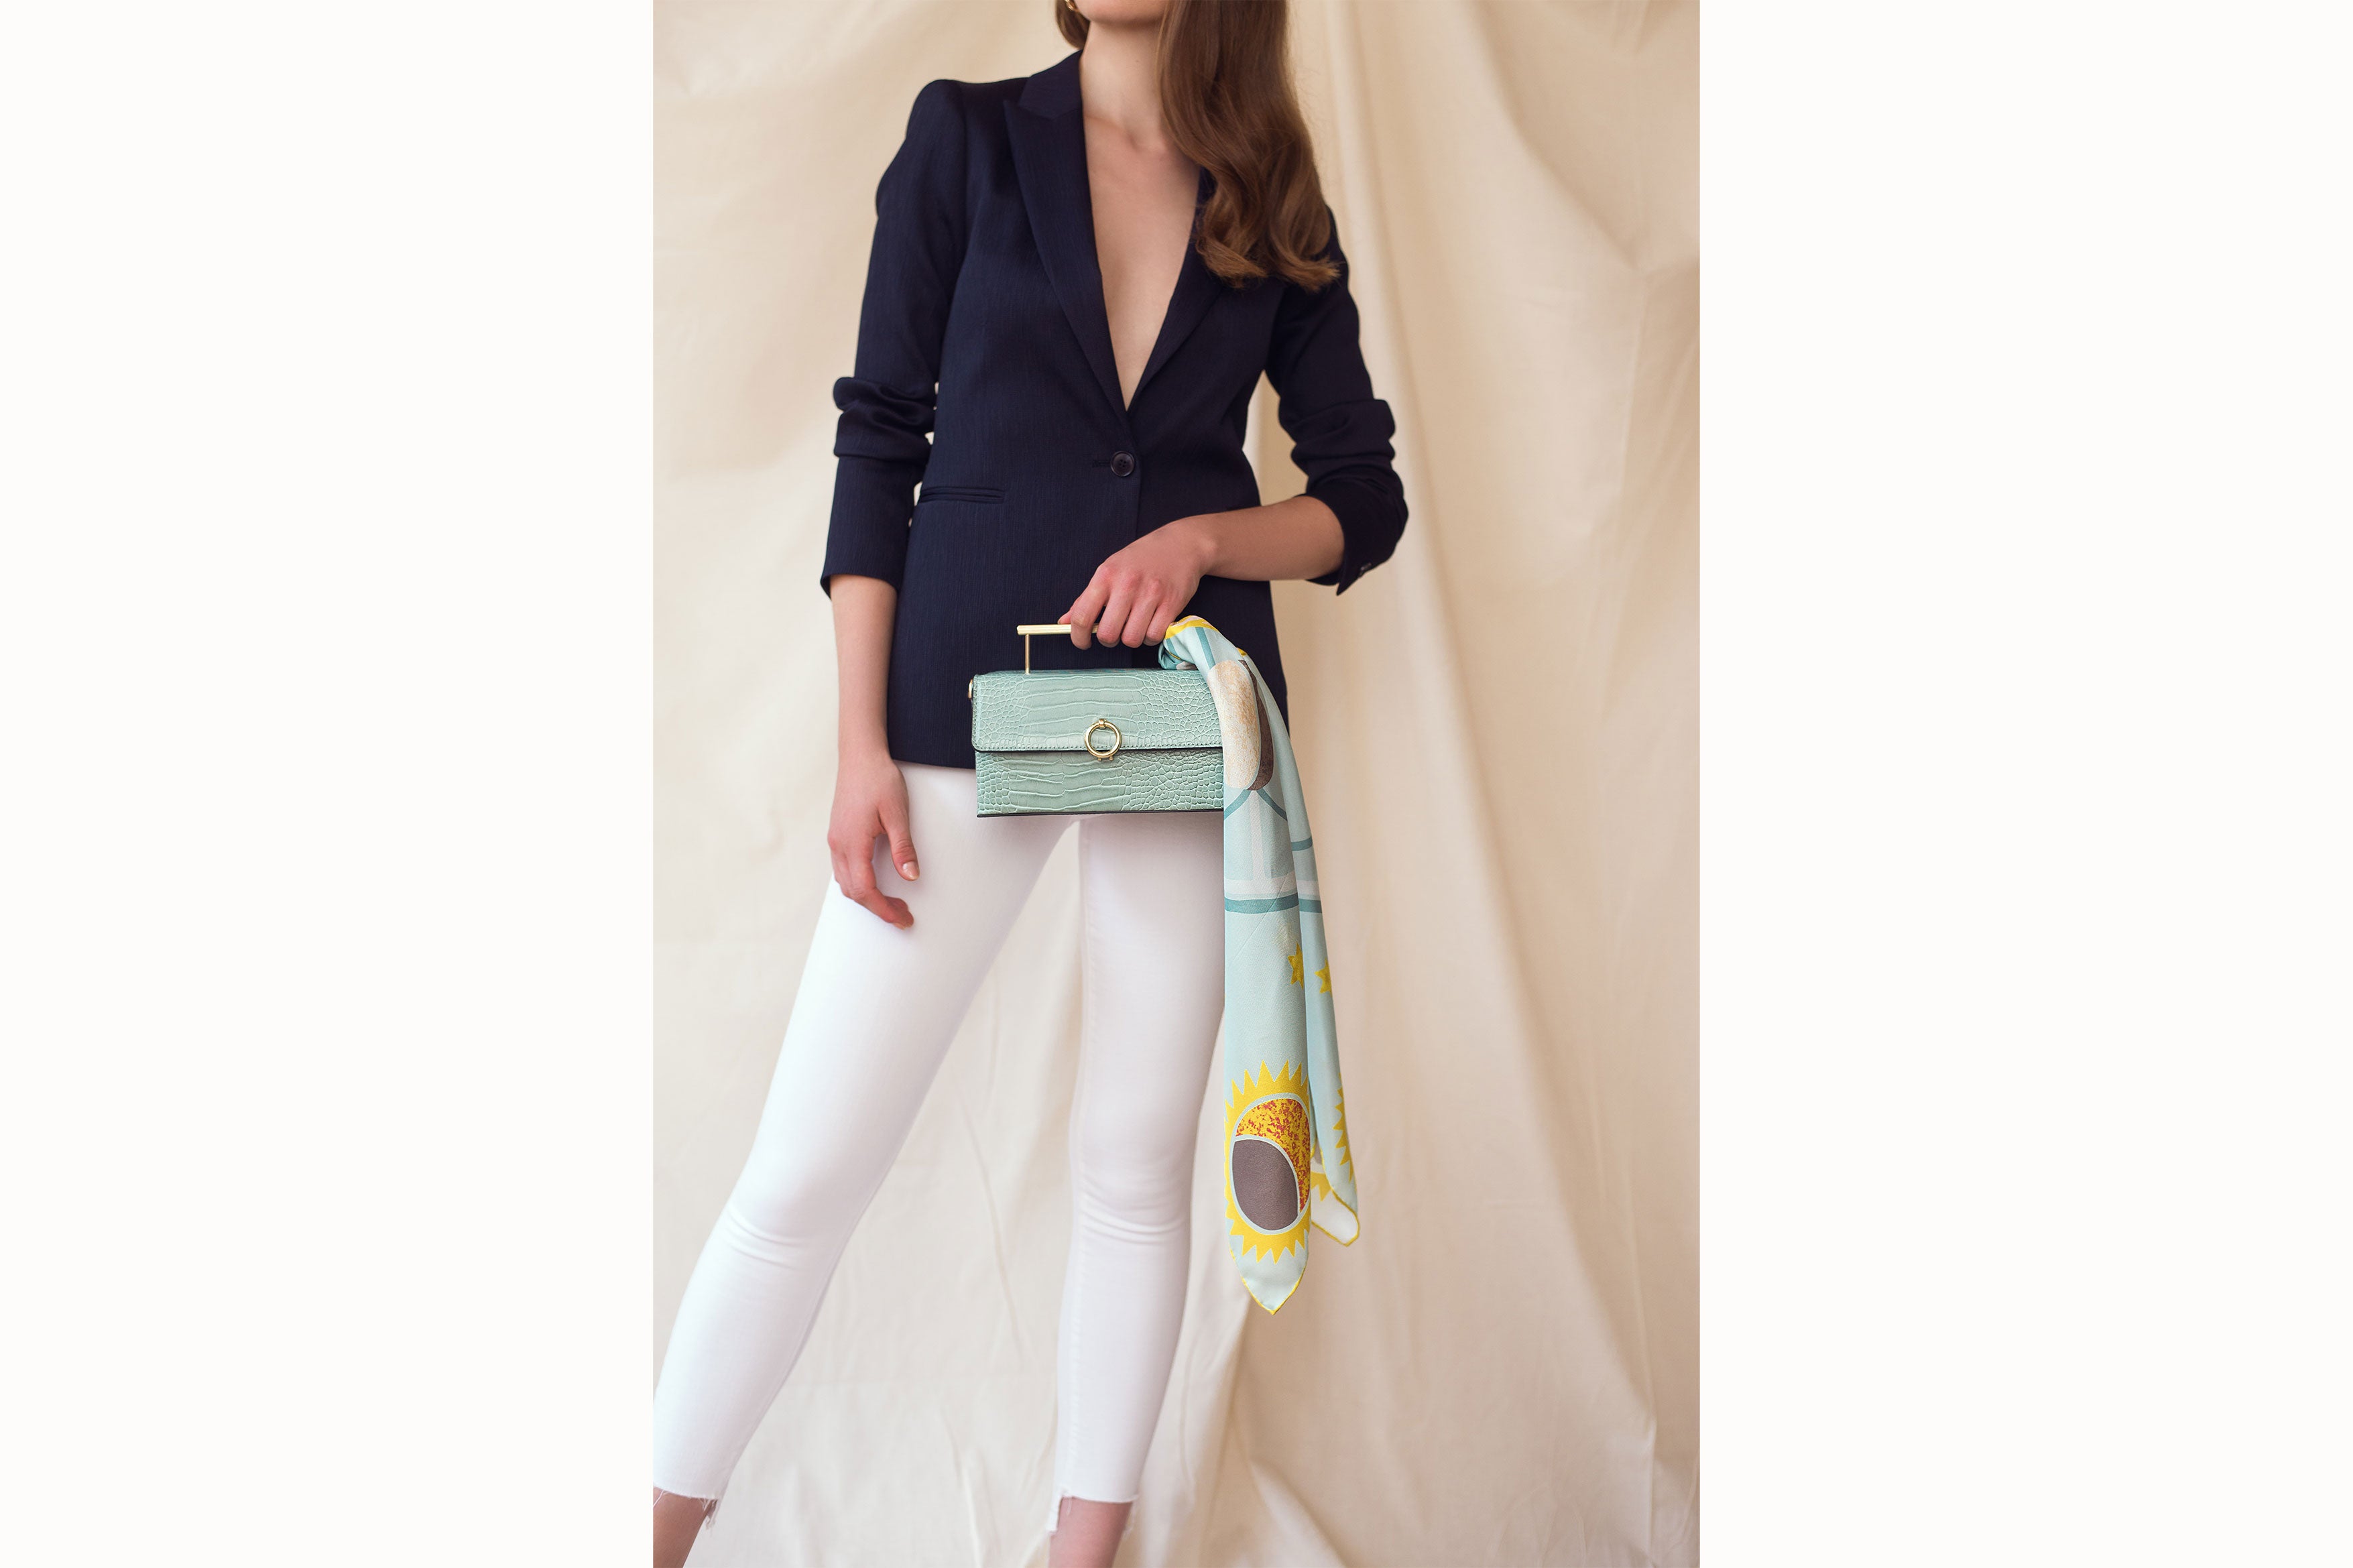 Image of female model wearing the scarf wrapped around the handle of a small turquoise leather handbag. Model is wearing white jeans and a navy blazer.